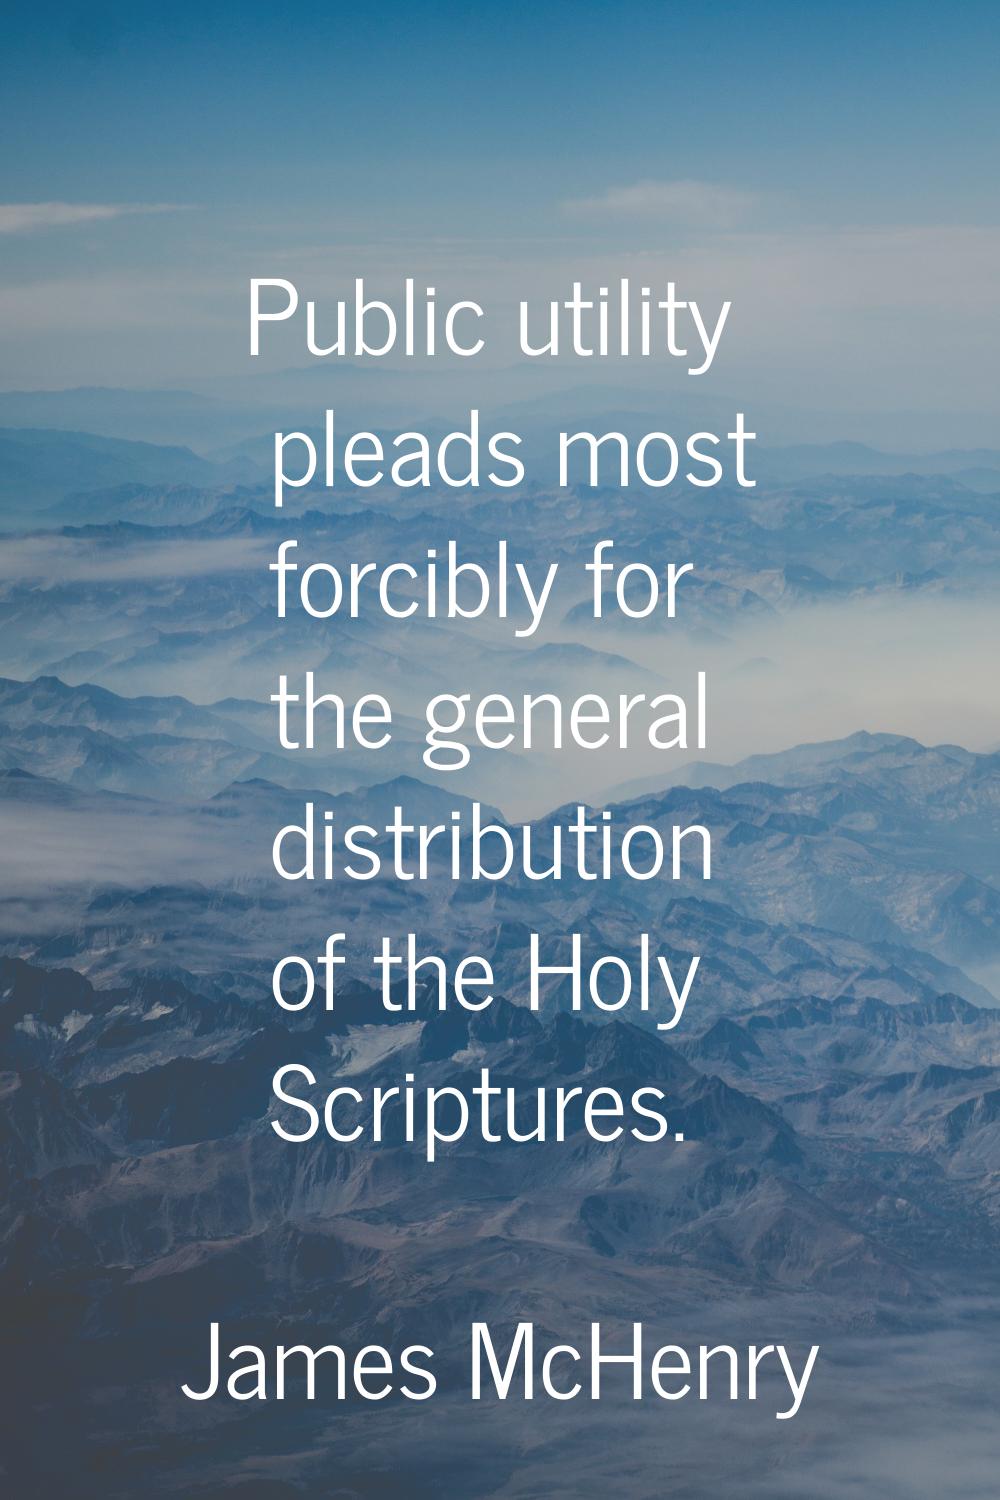 Public utility pleads most forcibly for the general distribution of the Holy Scriptures.